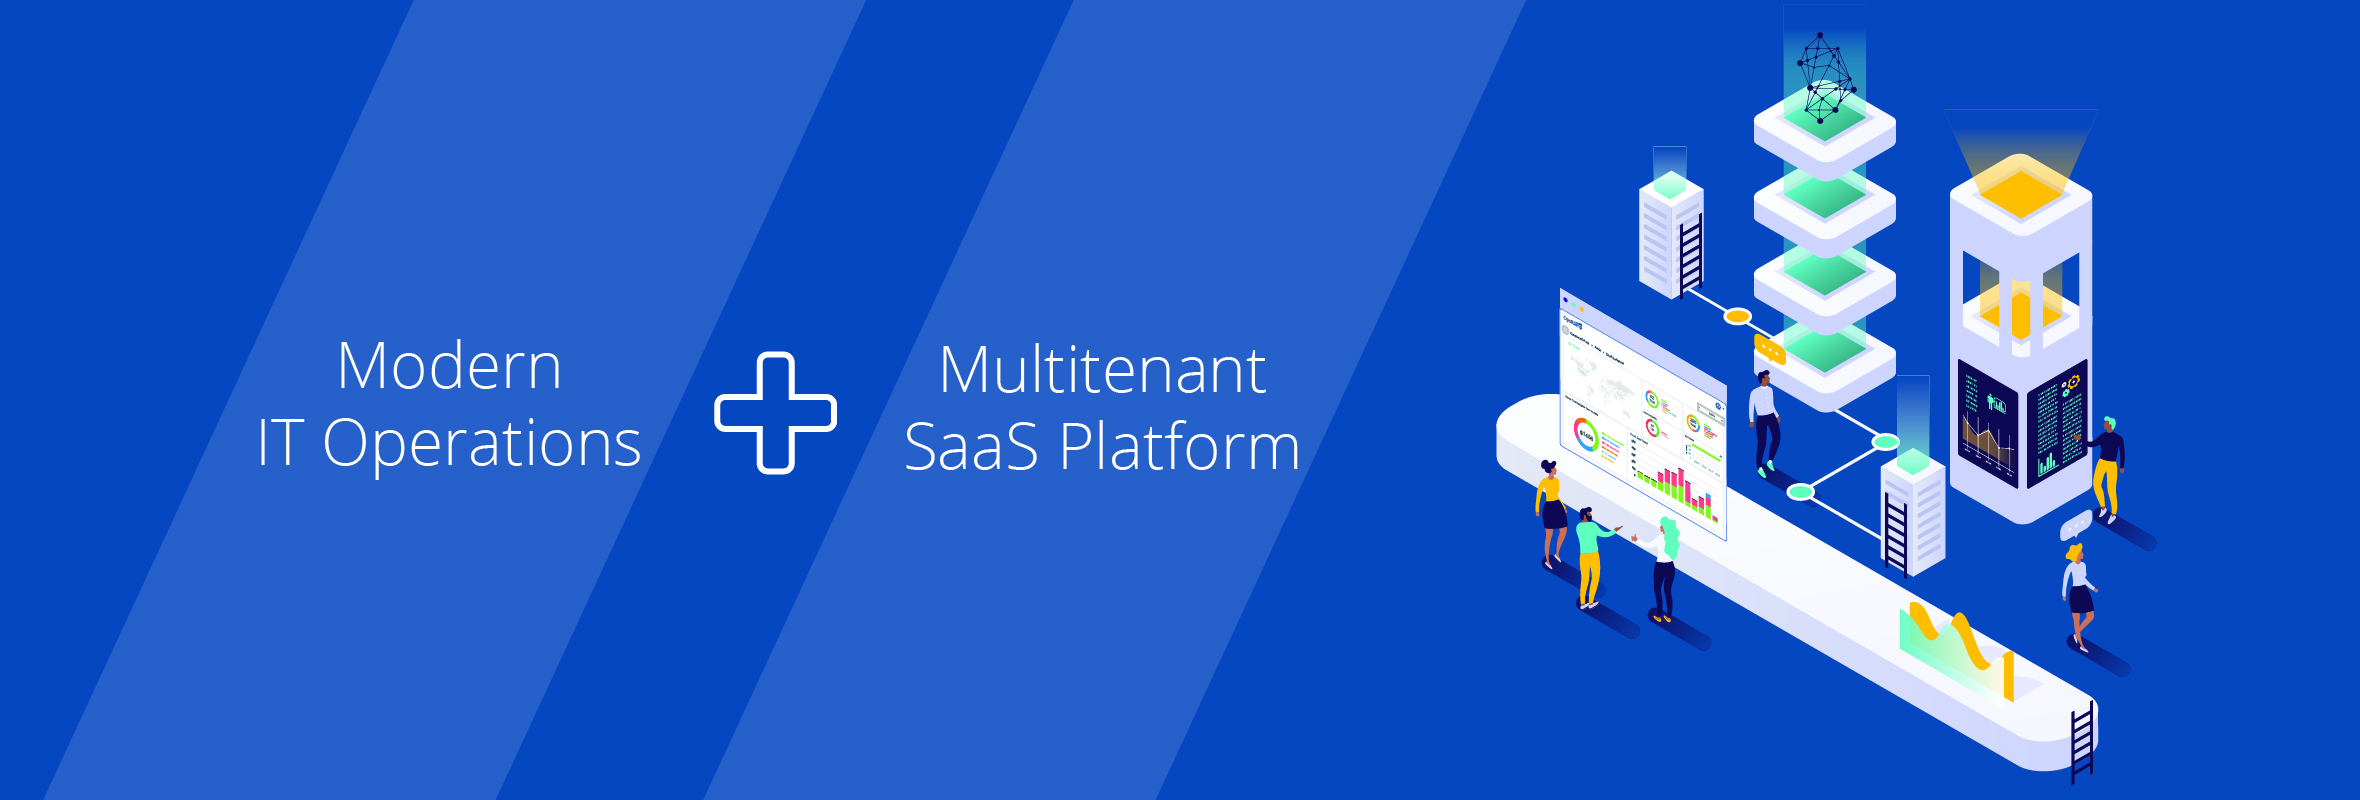 Modern IT Operations + Multitenant SaaS Platform: Better Productivity, Faster Updates, and Lower Costs For Enterprise IT